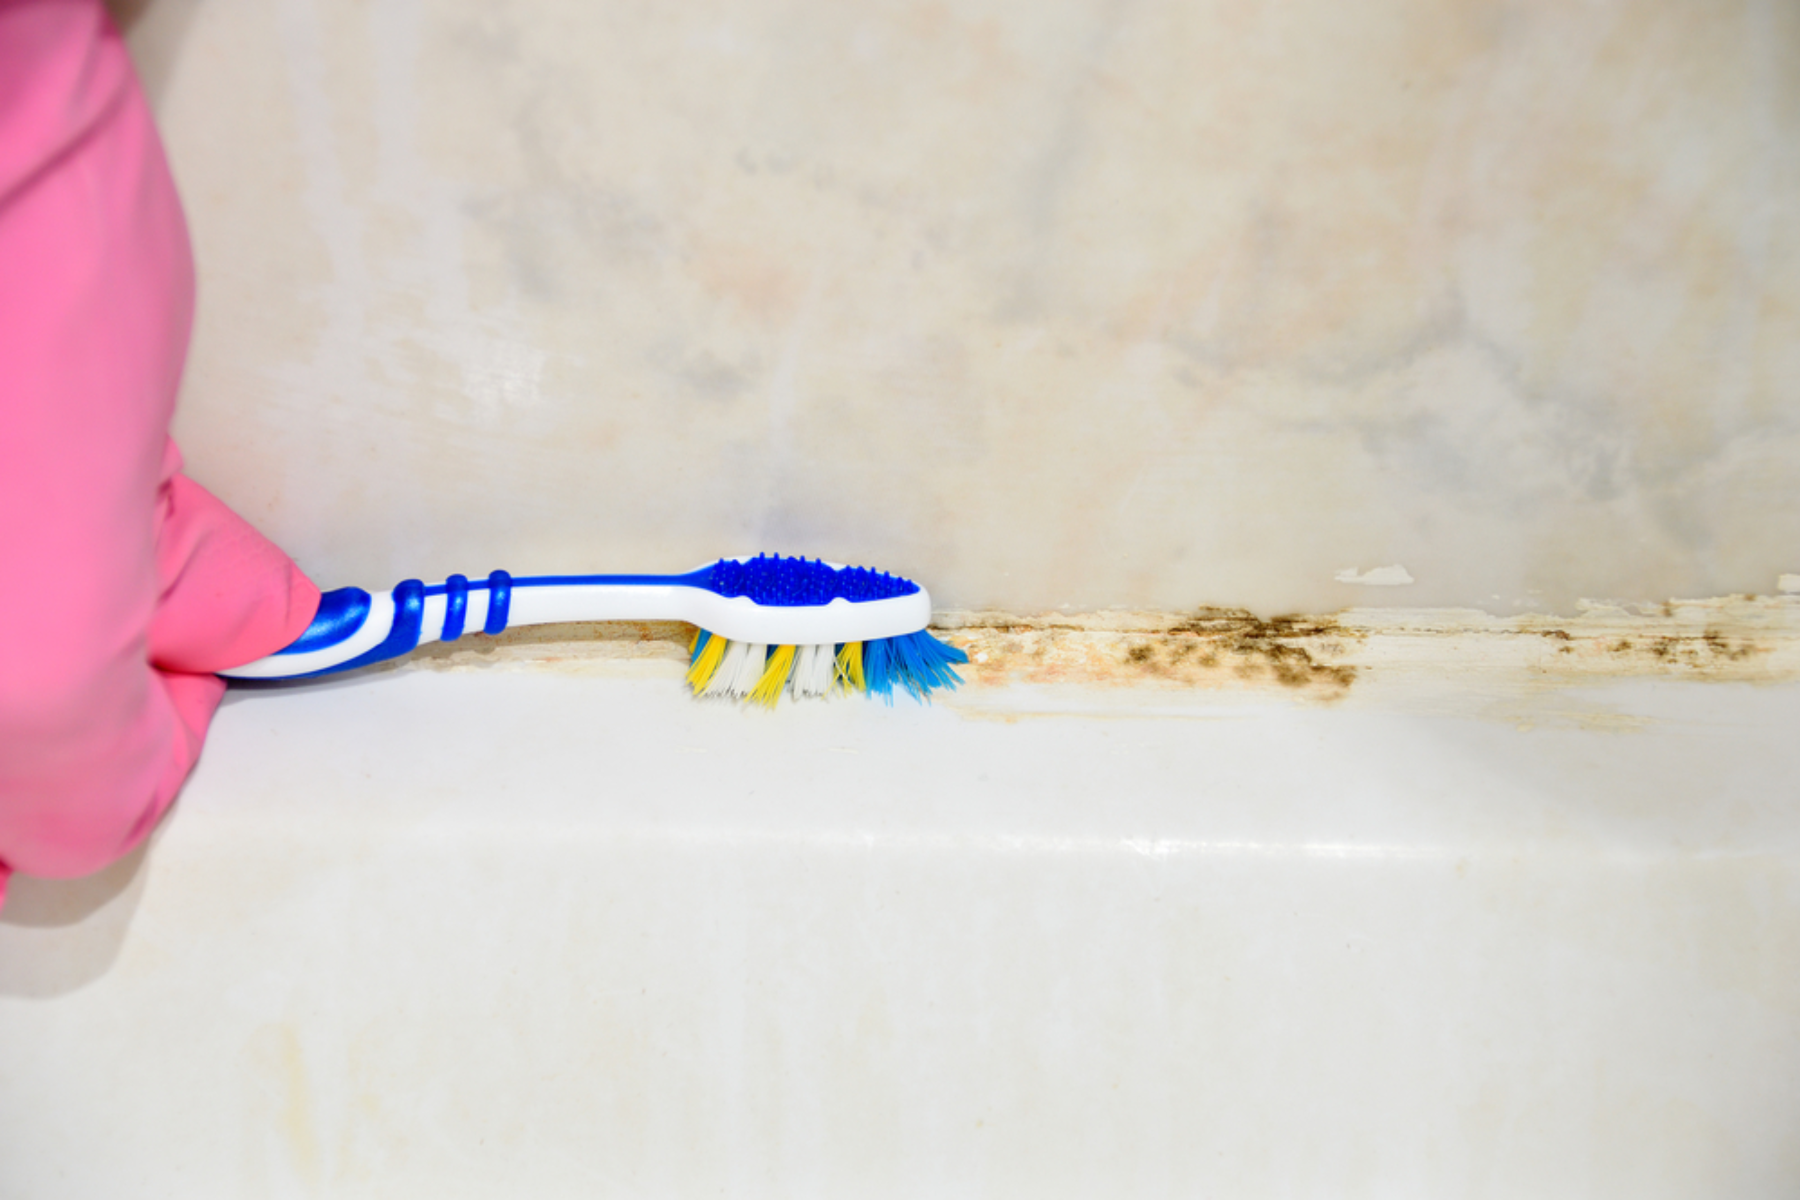 Homeowner Scrubbing Away Mould With Toothbrush